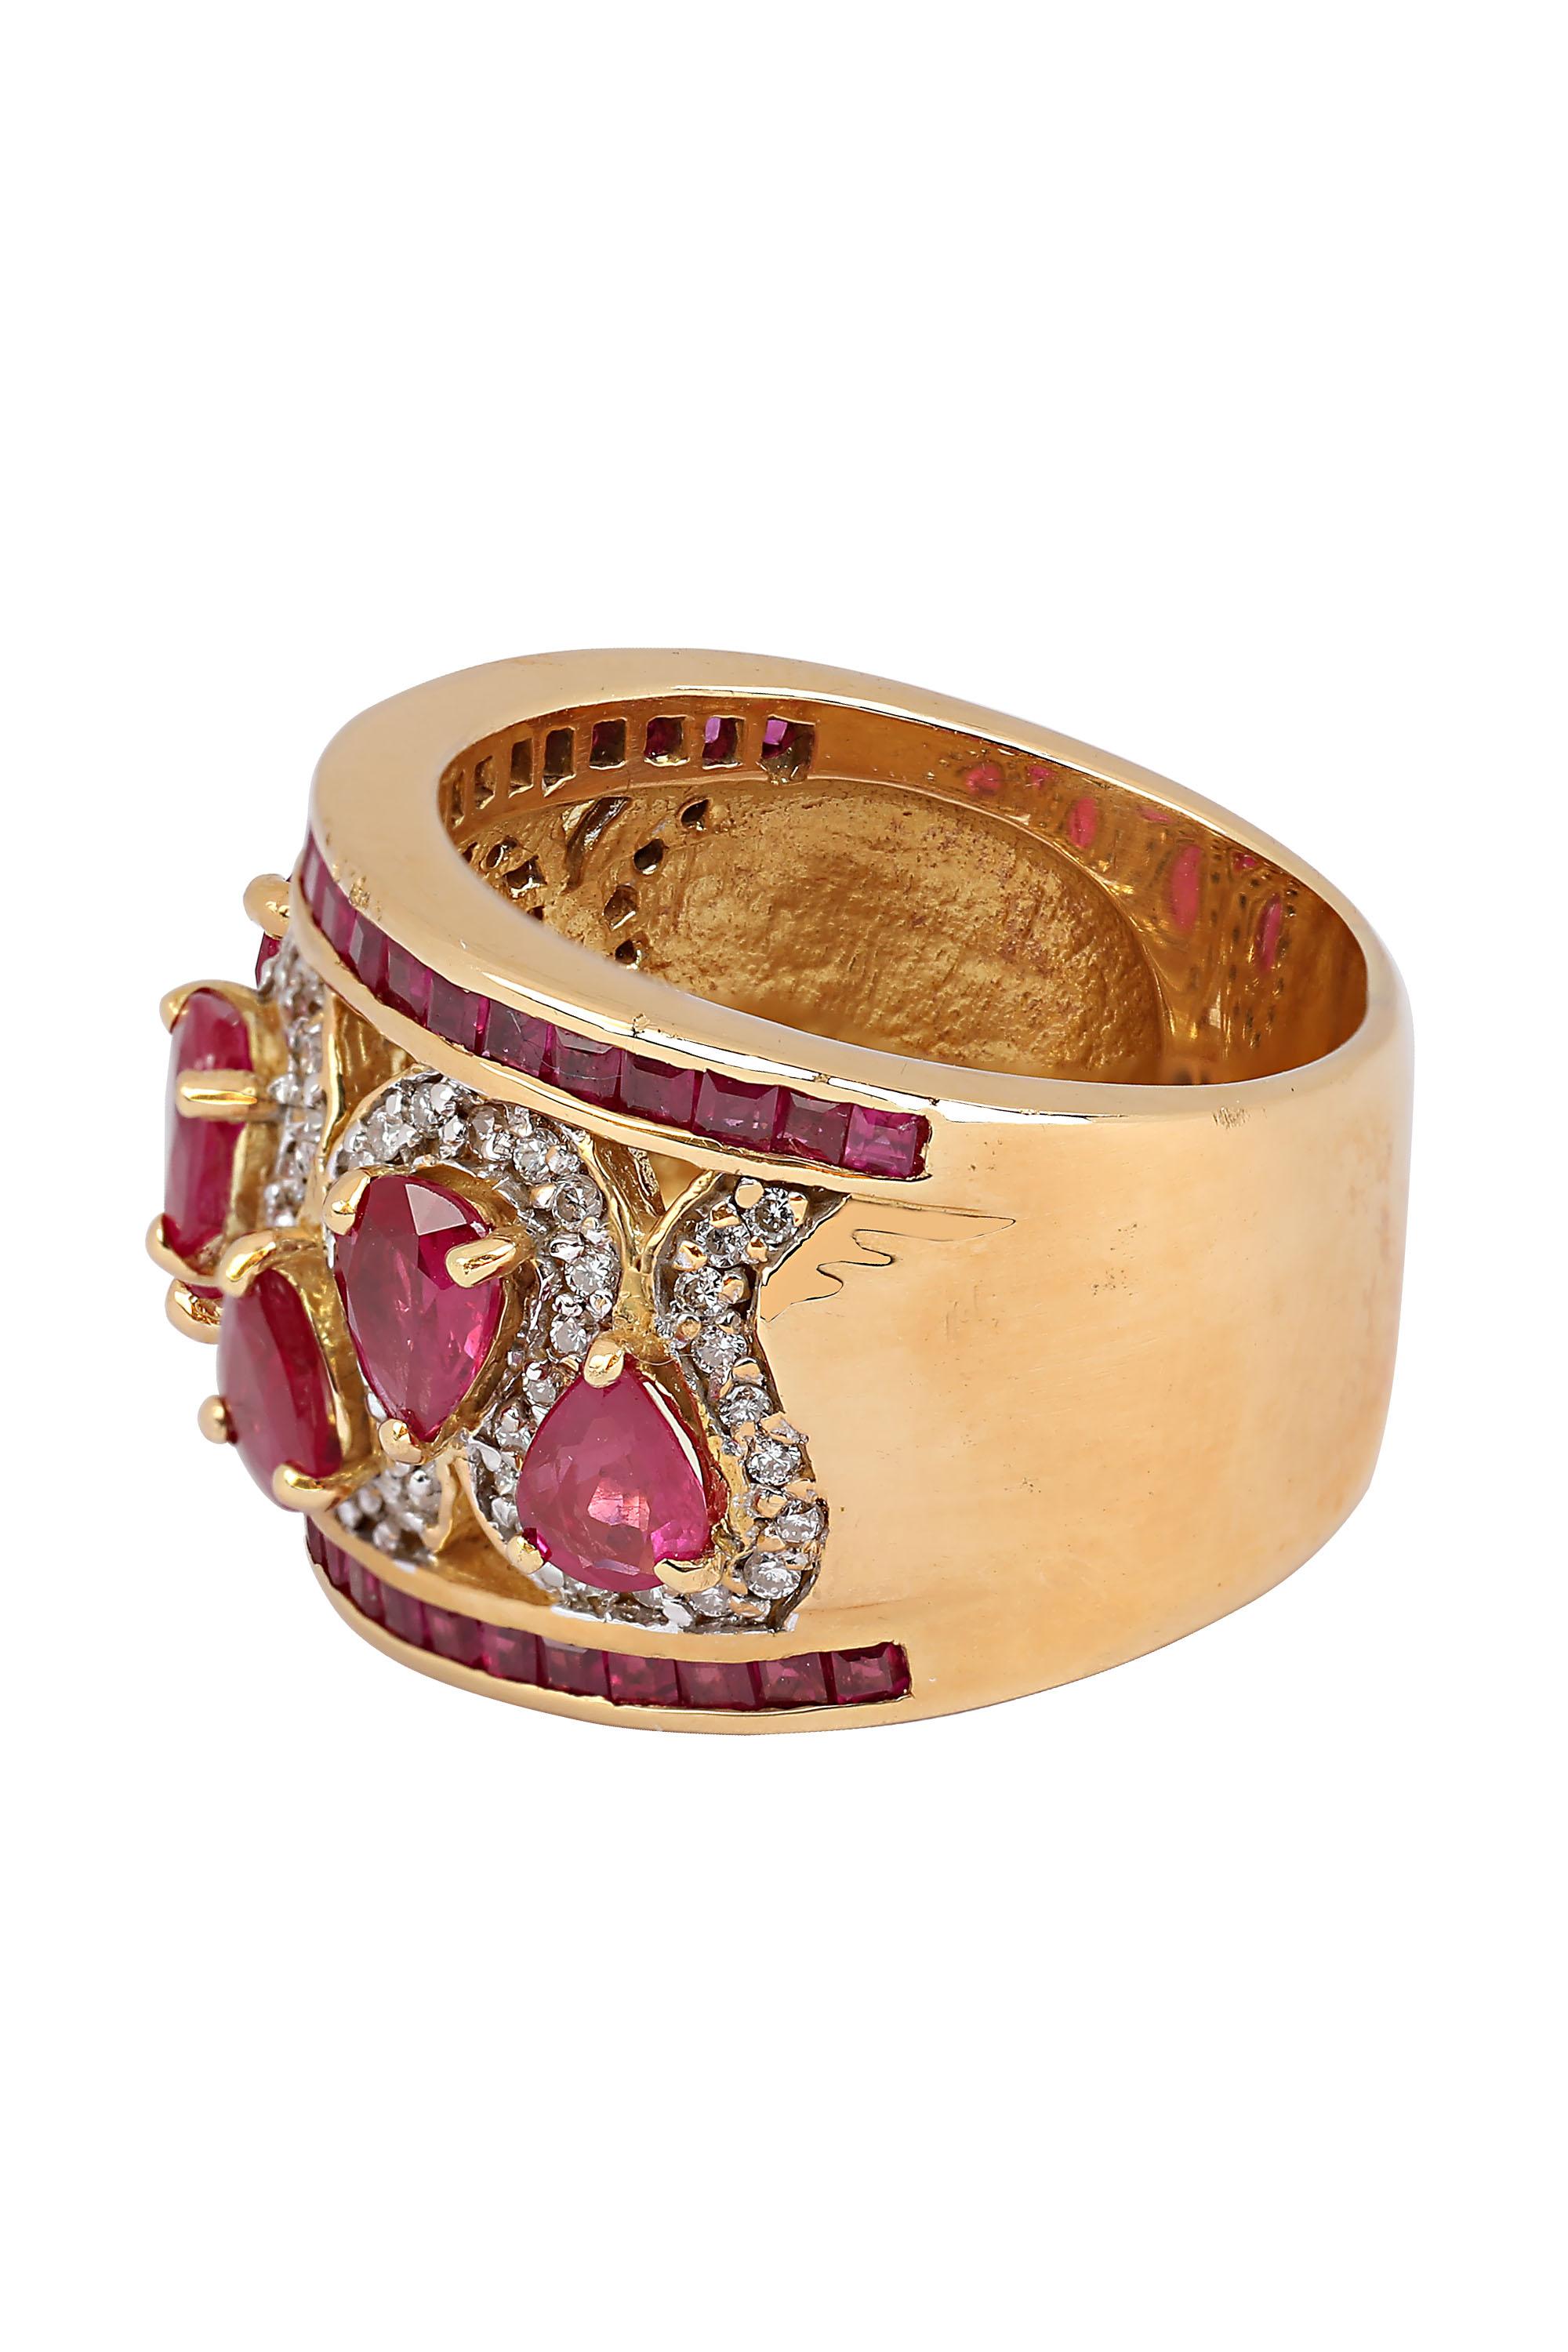 Fabricated in 18 karat yellow gold, this vintage beauty features seven alternating paisleys of bright red pear shaped rubies outlined by a sinuous framing of diamond pave. Smartly finished within a framing of square cut rubies. The pear shaped